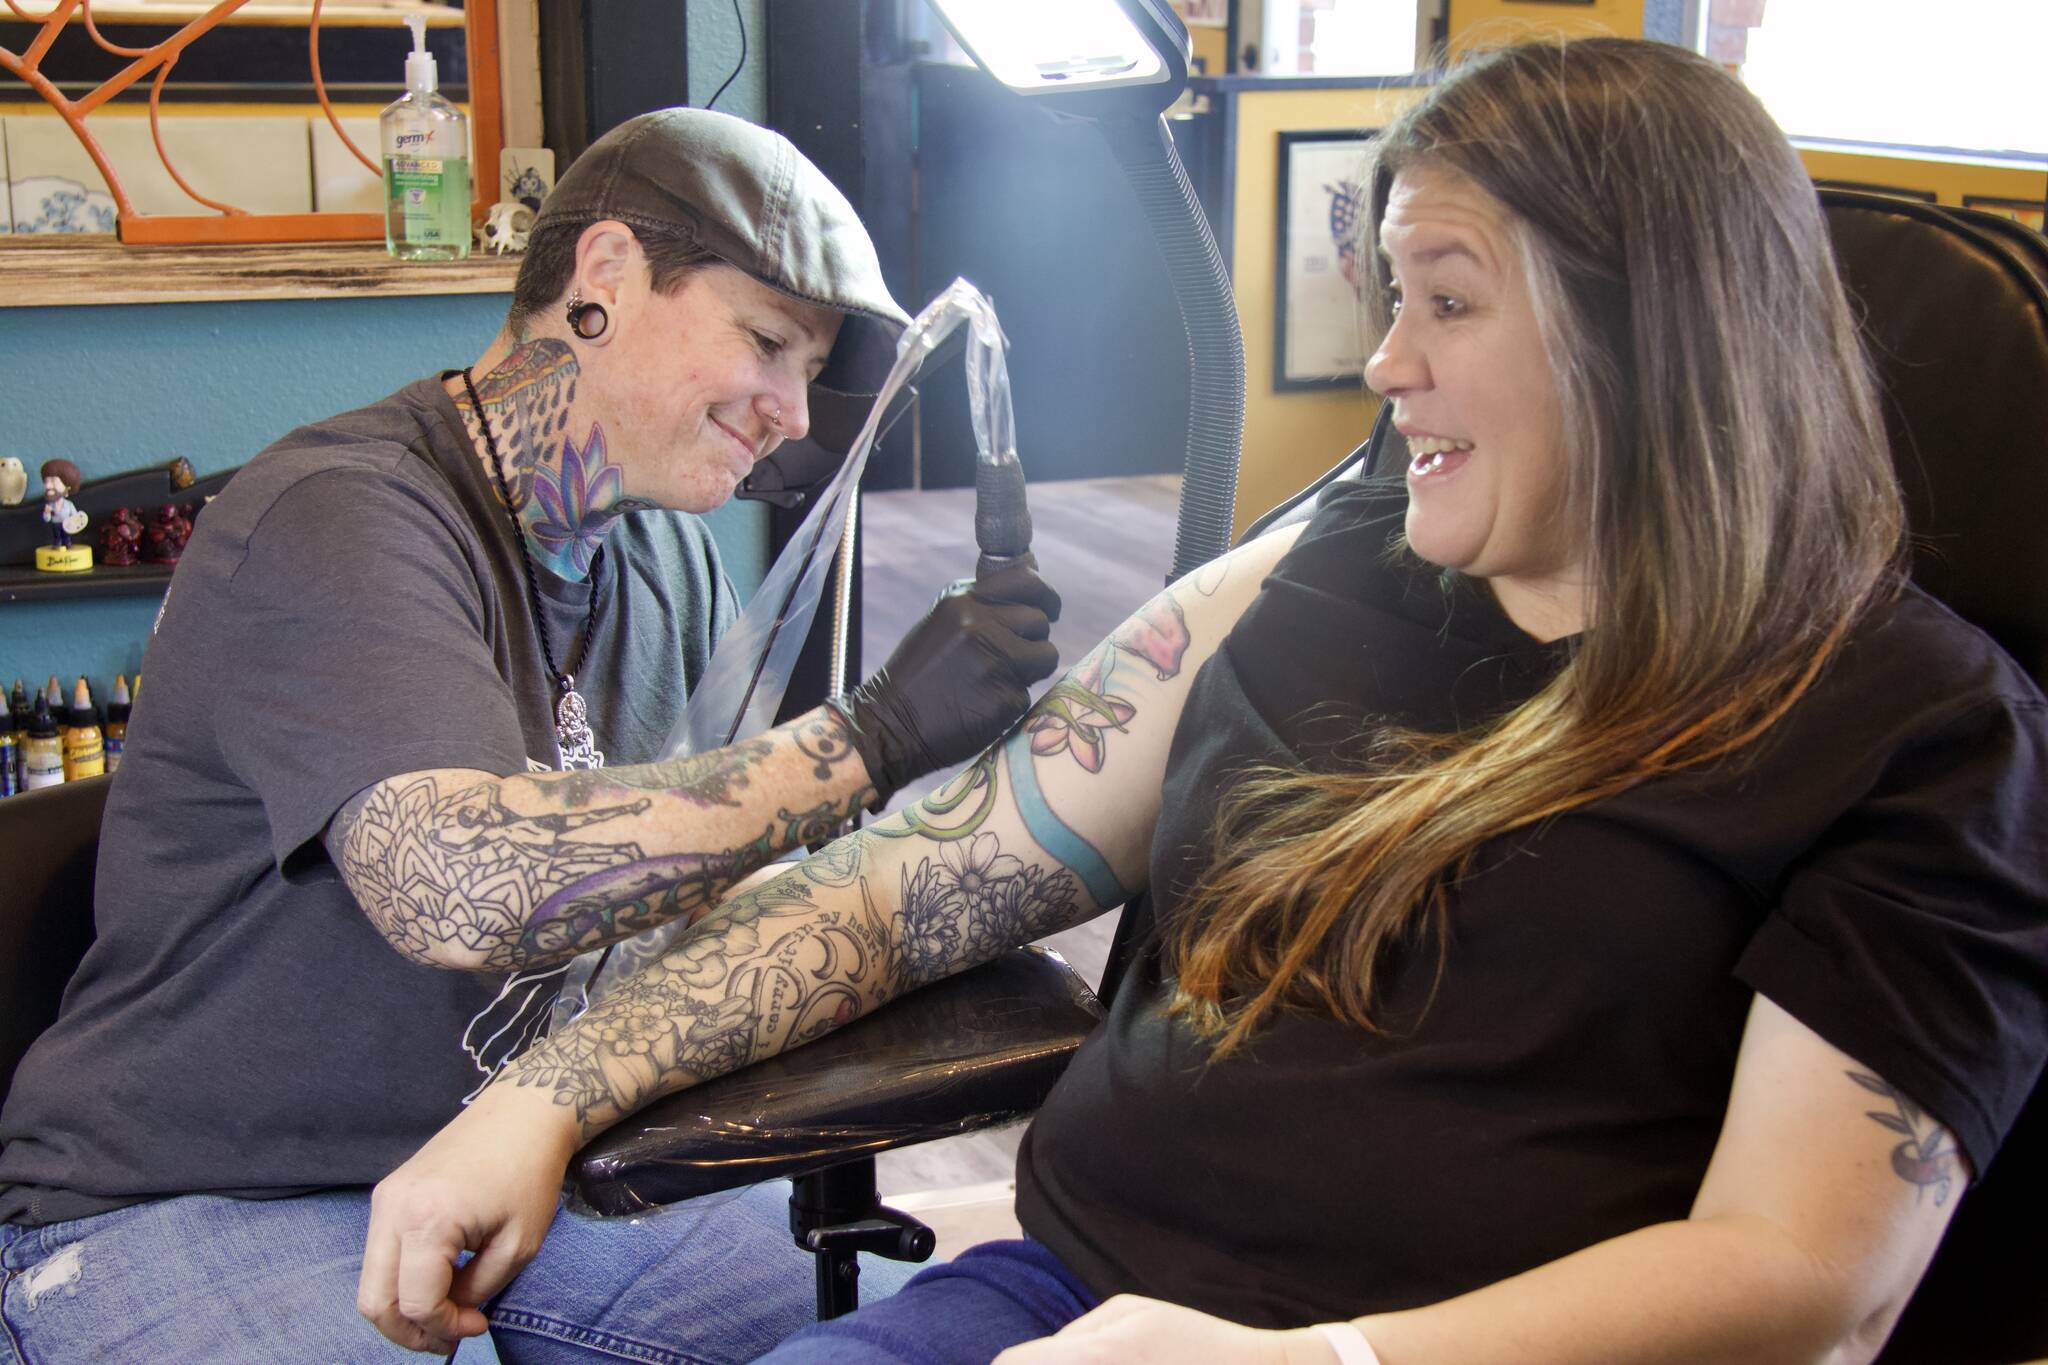 Tattoo shop moves, expands after decade